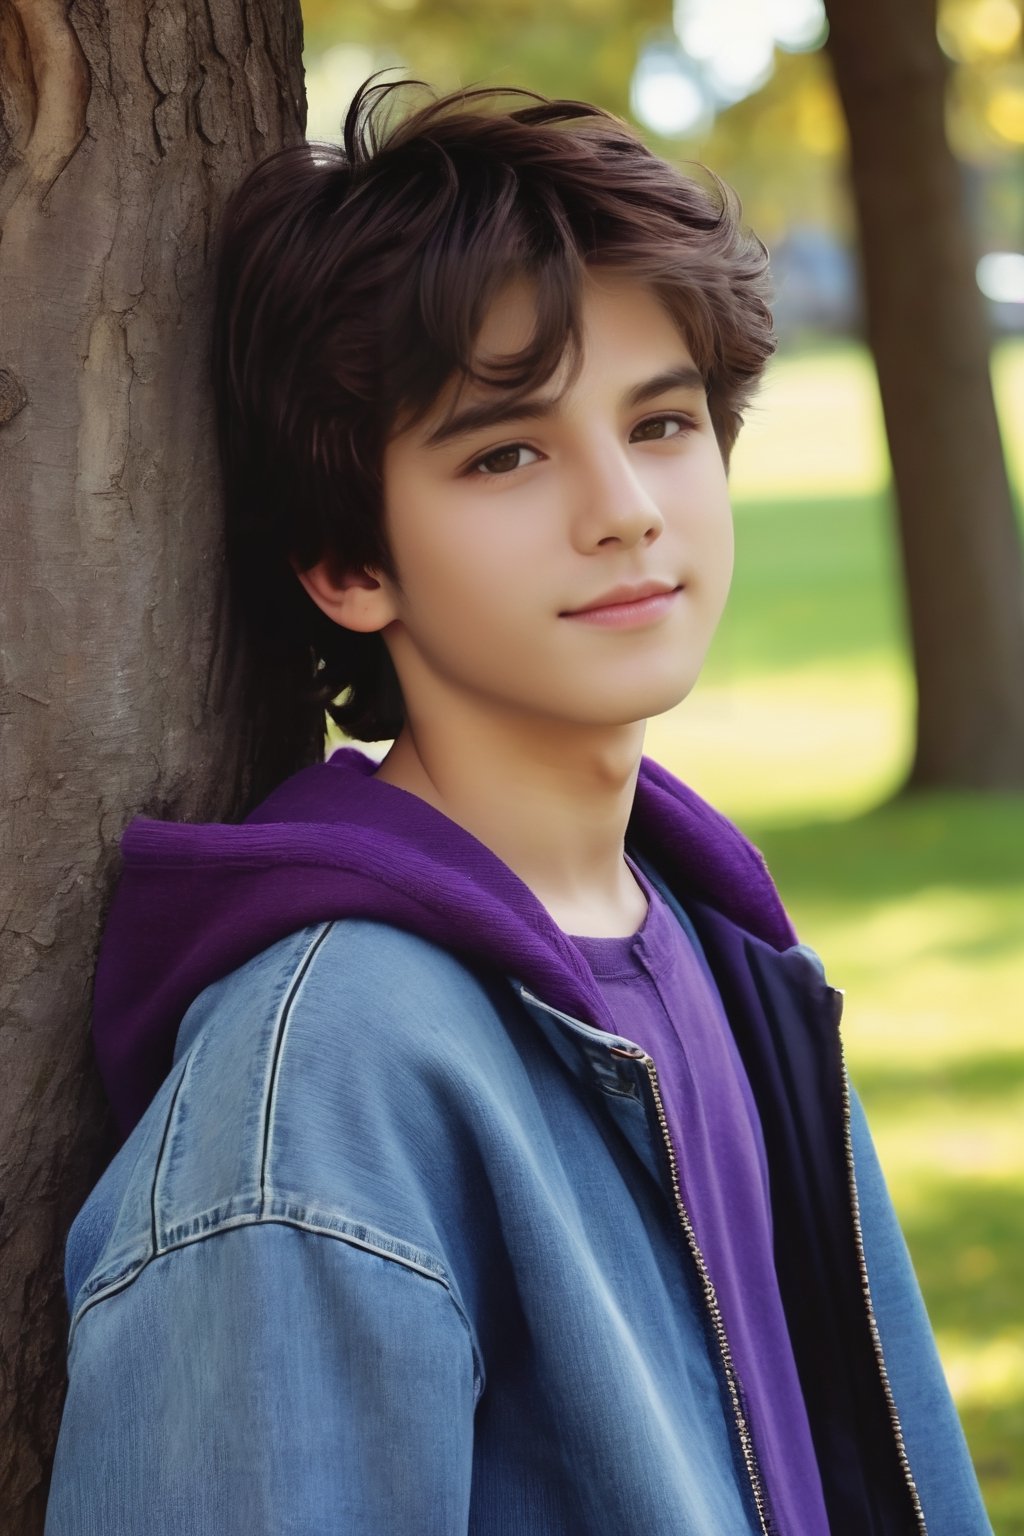 pretty 13 years old boy, European, hzel eyes, long shaggy purple hair, slight smile, detialed photogrpahy, 8k masterpiece, warm lighting, smooth skin, 3d style, cool boy wearing open zip-up sweater (hood down) with shirt underneath and baggy jeans; 1980s style, leaning against tree in the park, dynamic pose